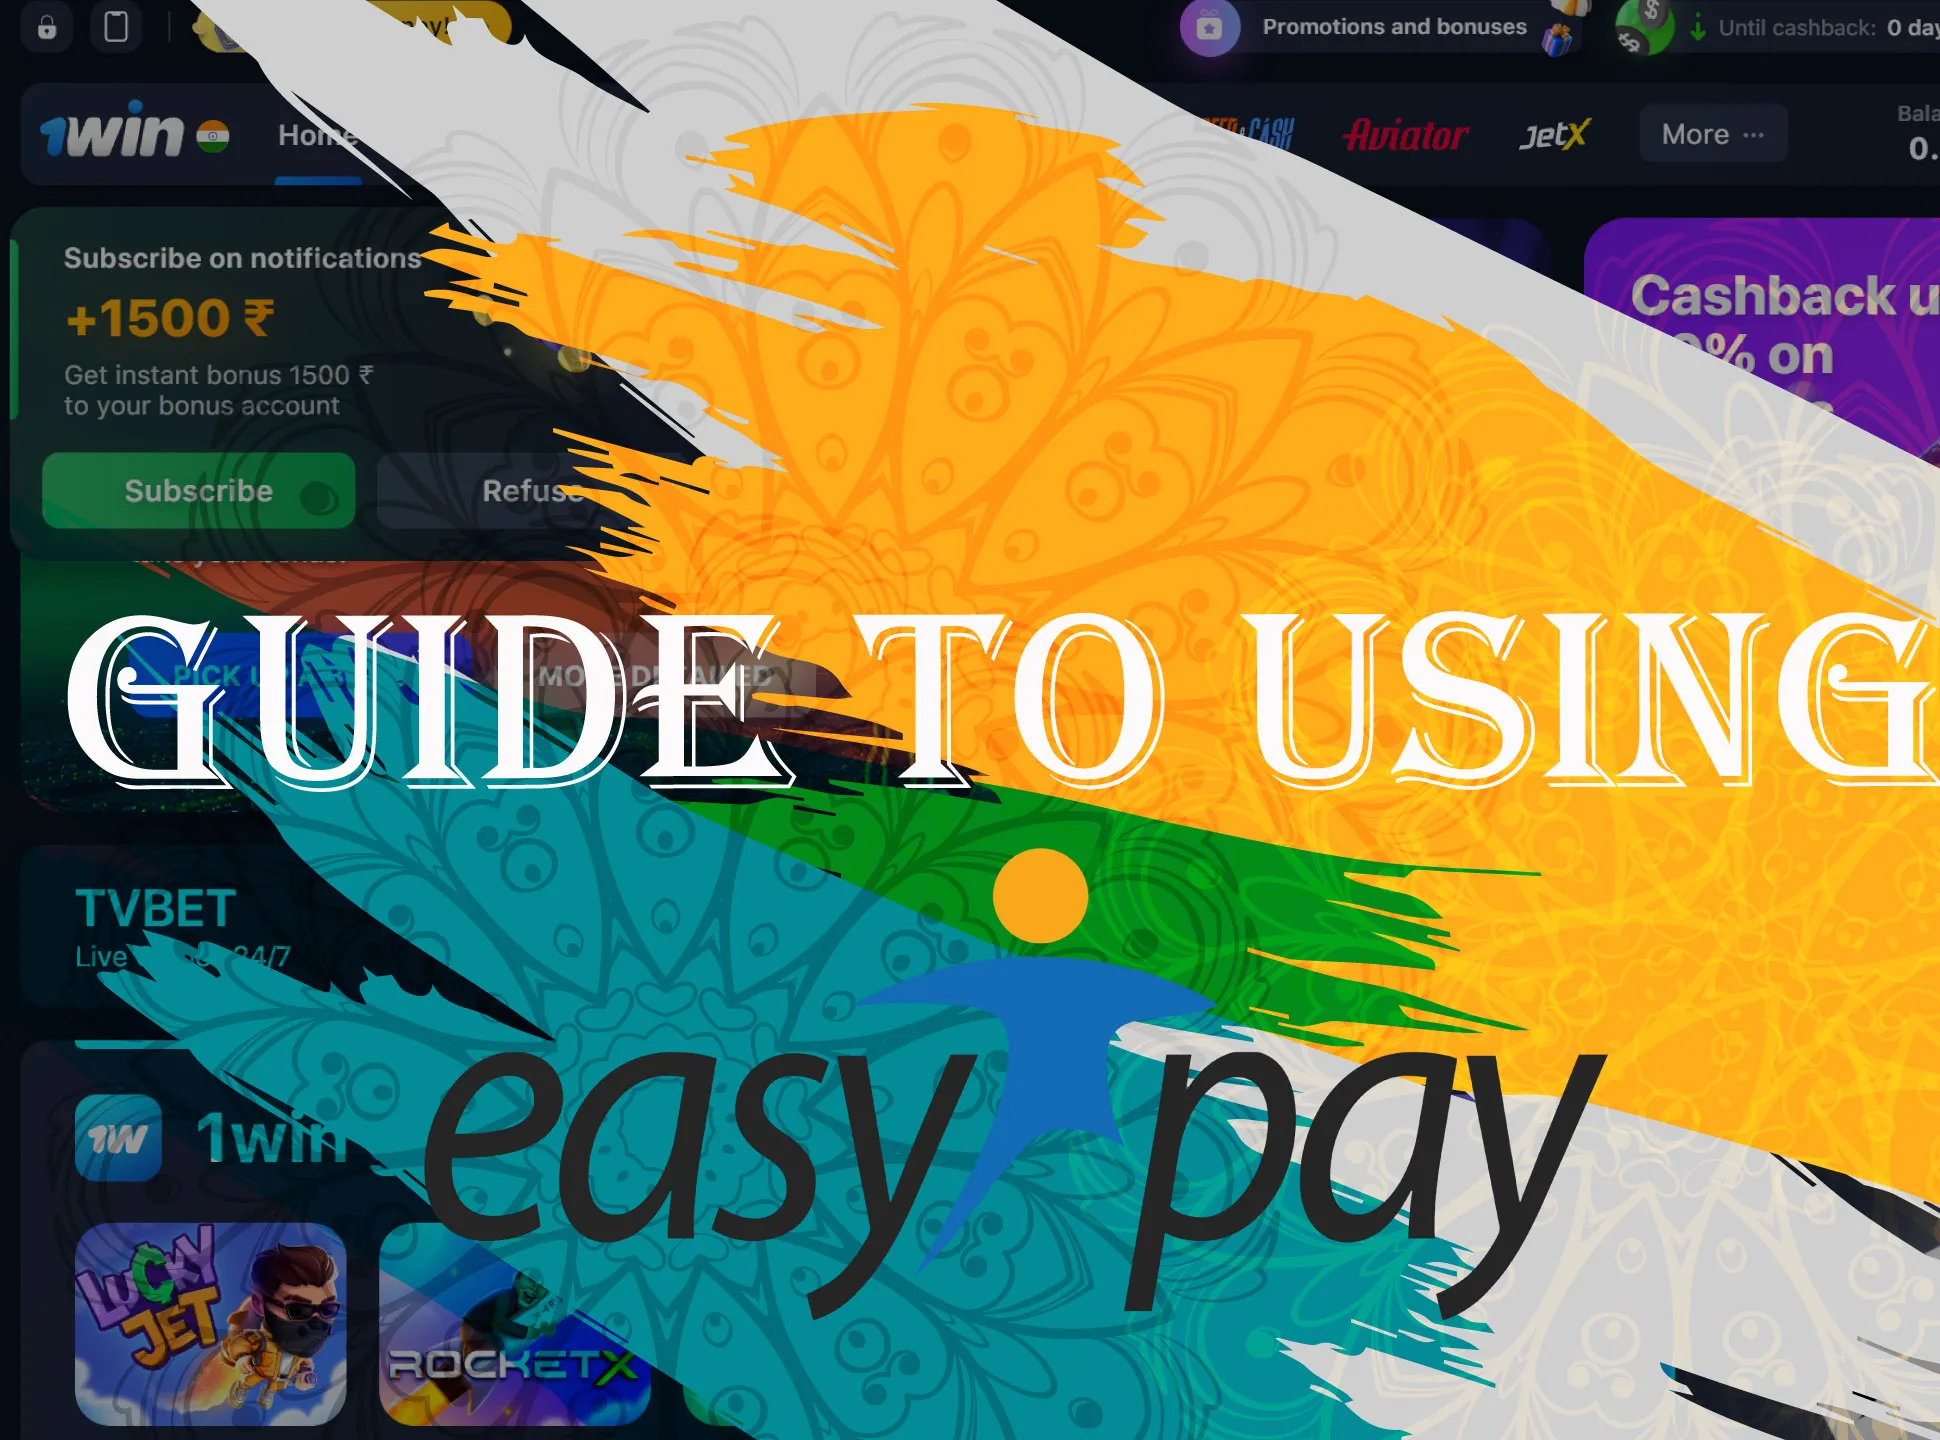 Use our guide to get an EazyPay account.